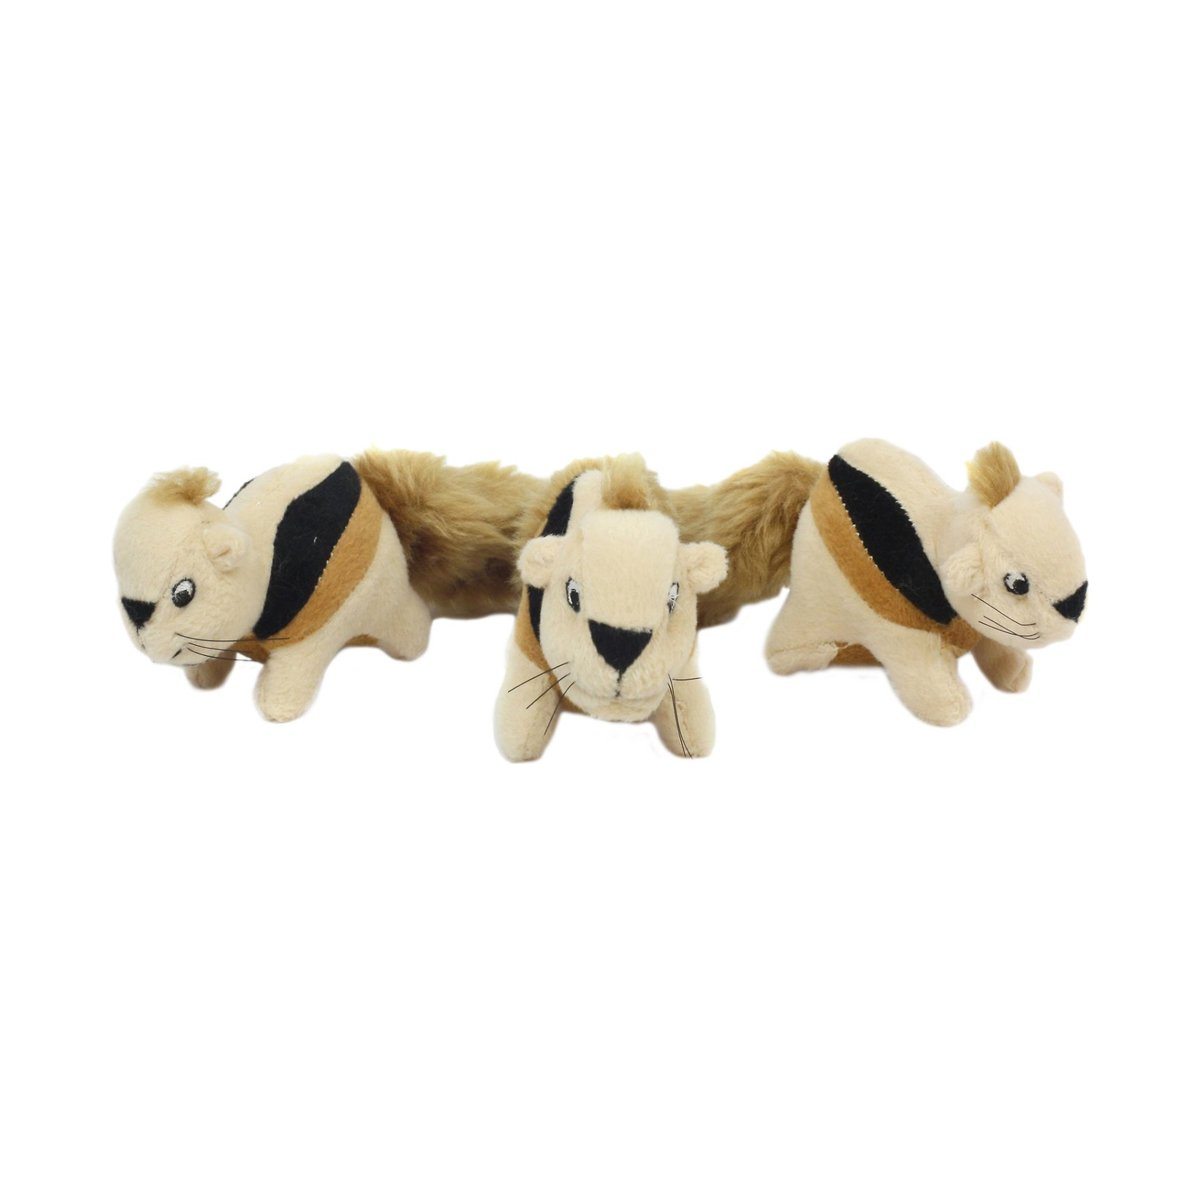 Hide-A-Squirrel Replacement Squirrels 3 Pack | Pawlicious & Company